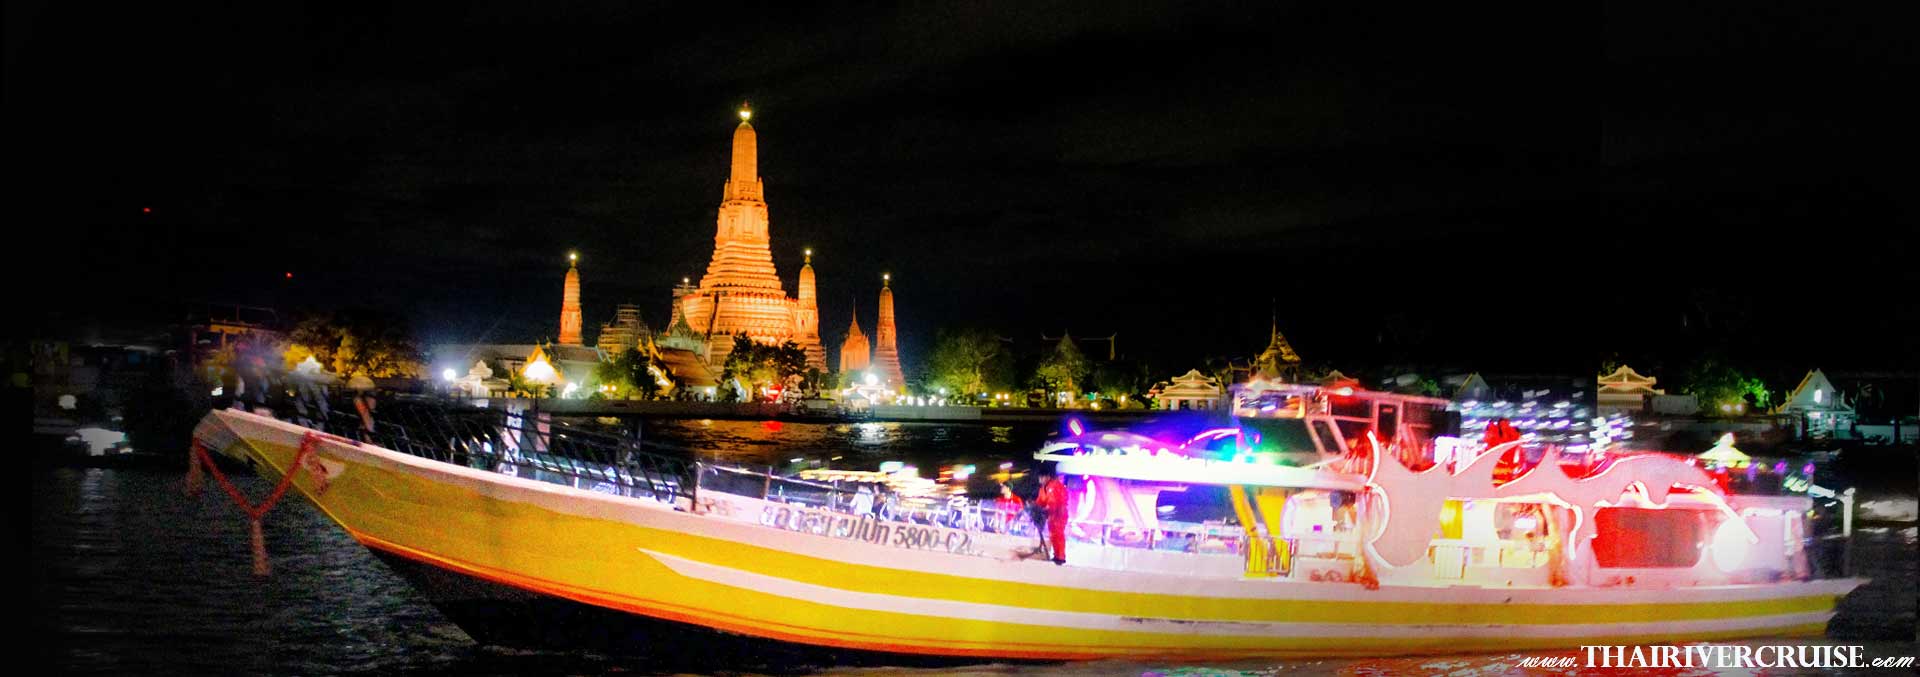 Yod Siam Cruise, Best cocktails Chao Phraya river Cruise Yod Siam Boat sunset cruise cocktail Bangkok & night river Cruise including beer, soft drink, price ticket discount booking offer low price promotion